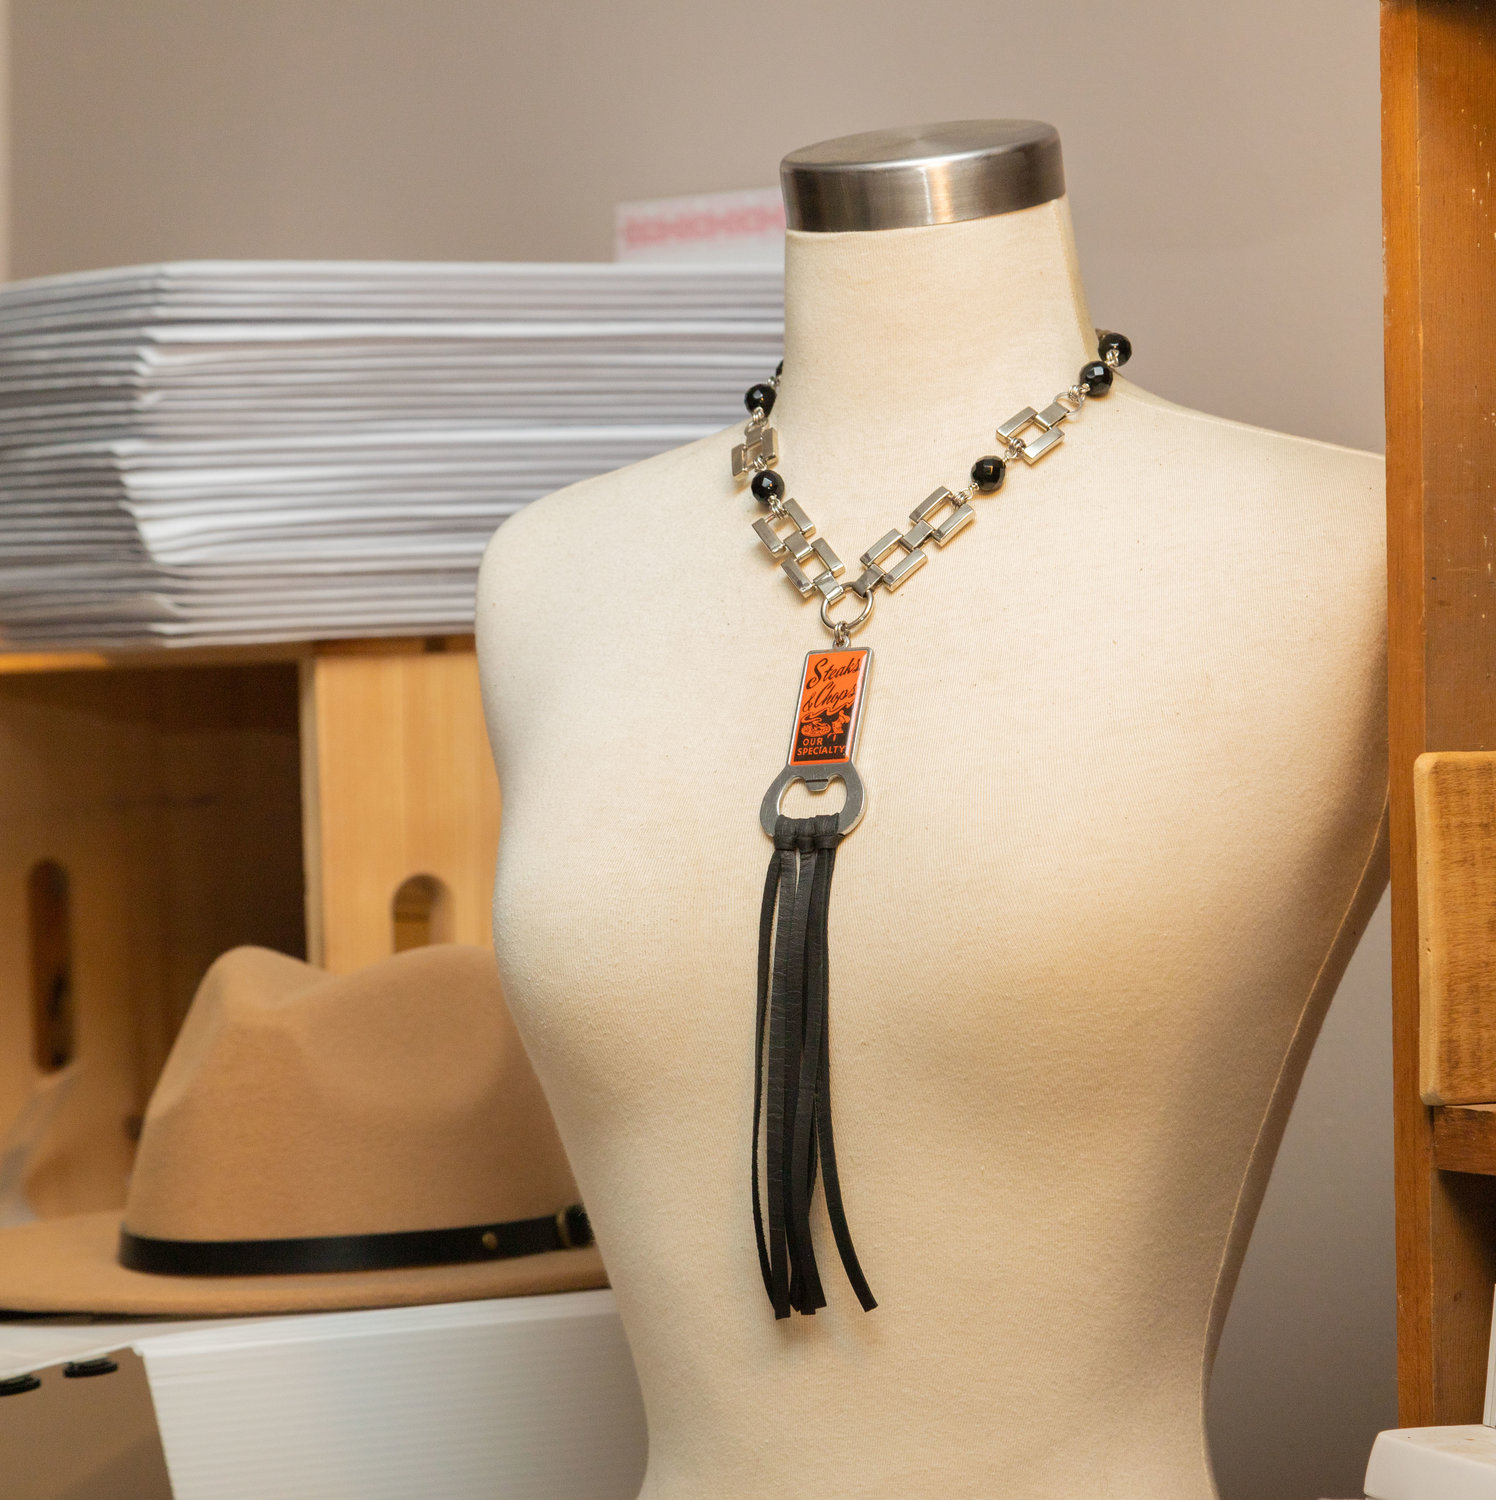 A belt chain and some leather turn a bottle opener into a necklace. Anne Jansen recycles small items into wearable art for her jewelry line, Key of A.